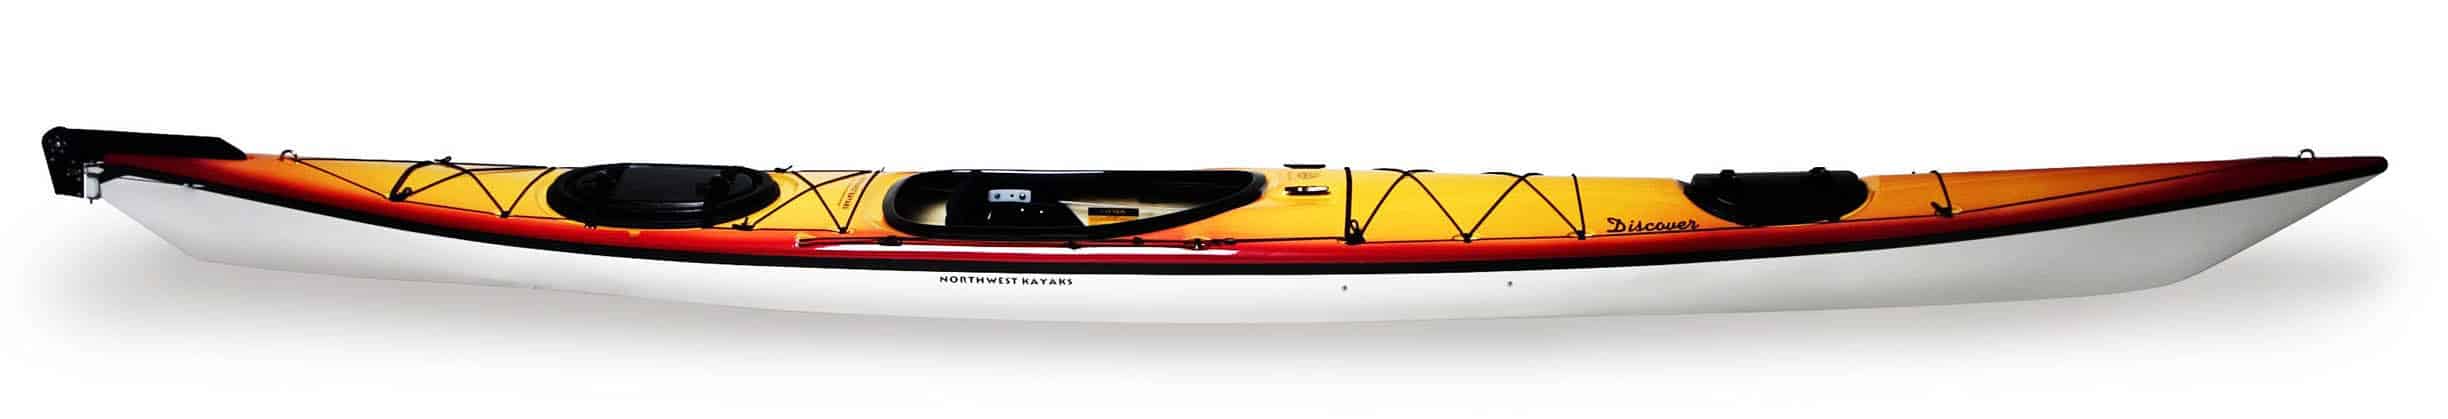 Discover Solo Touring Kayak by Northwest Kayaks